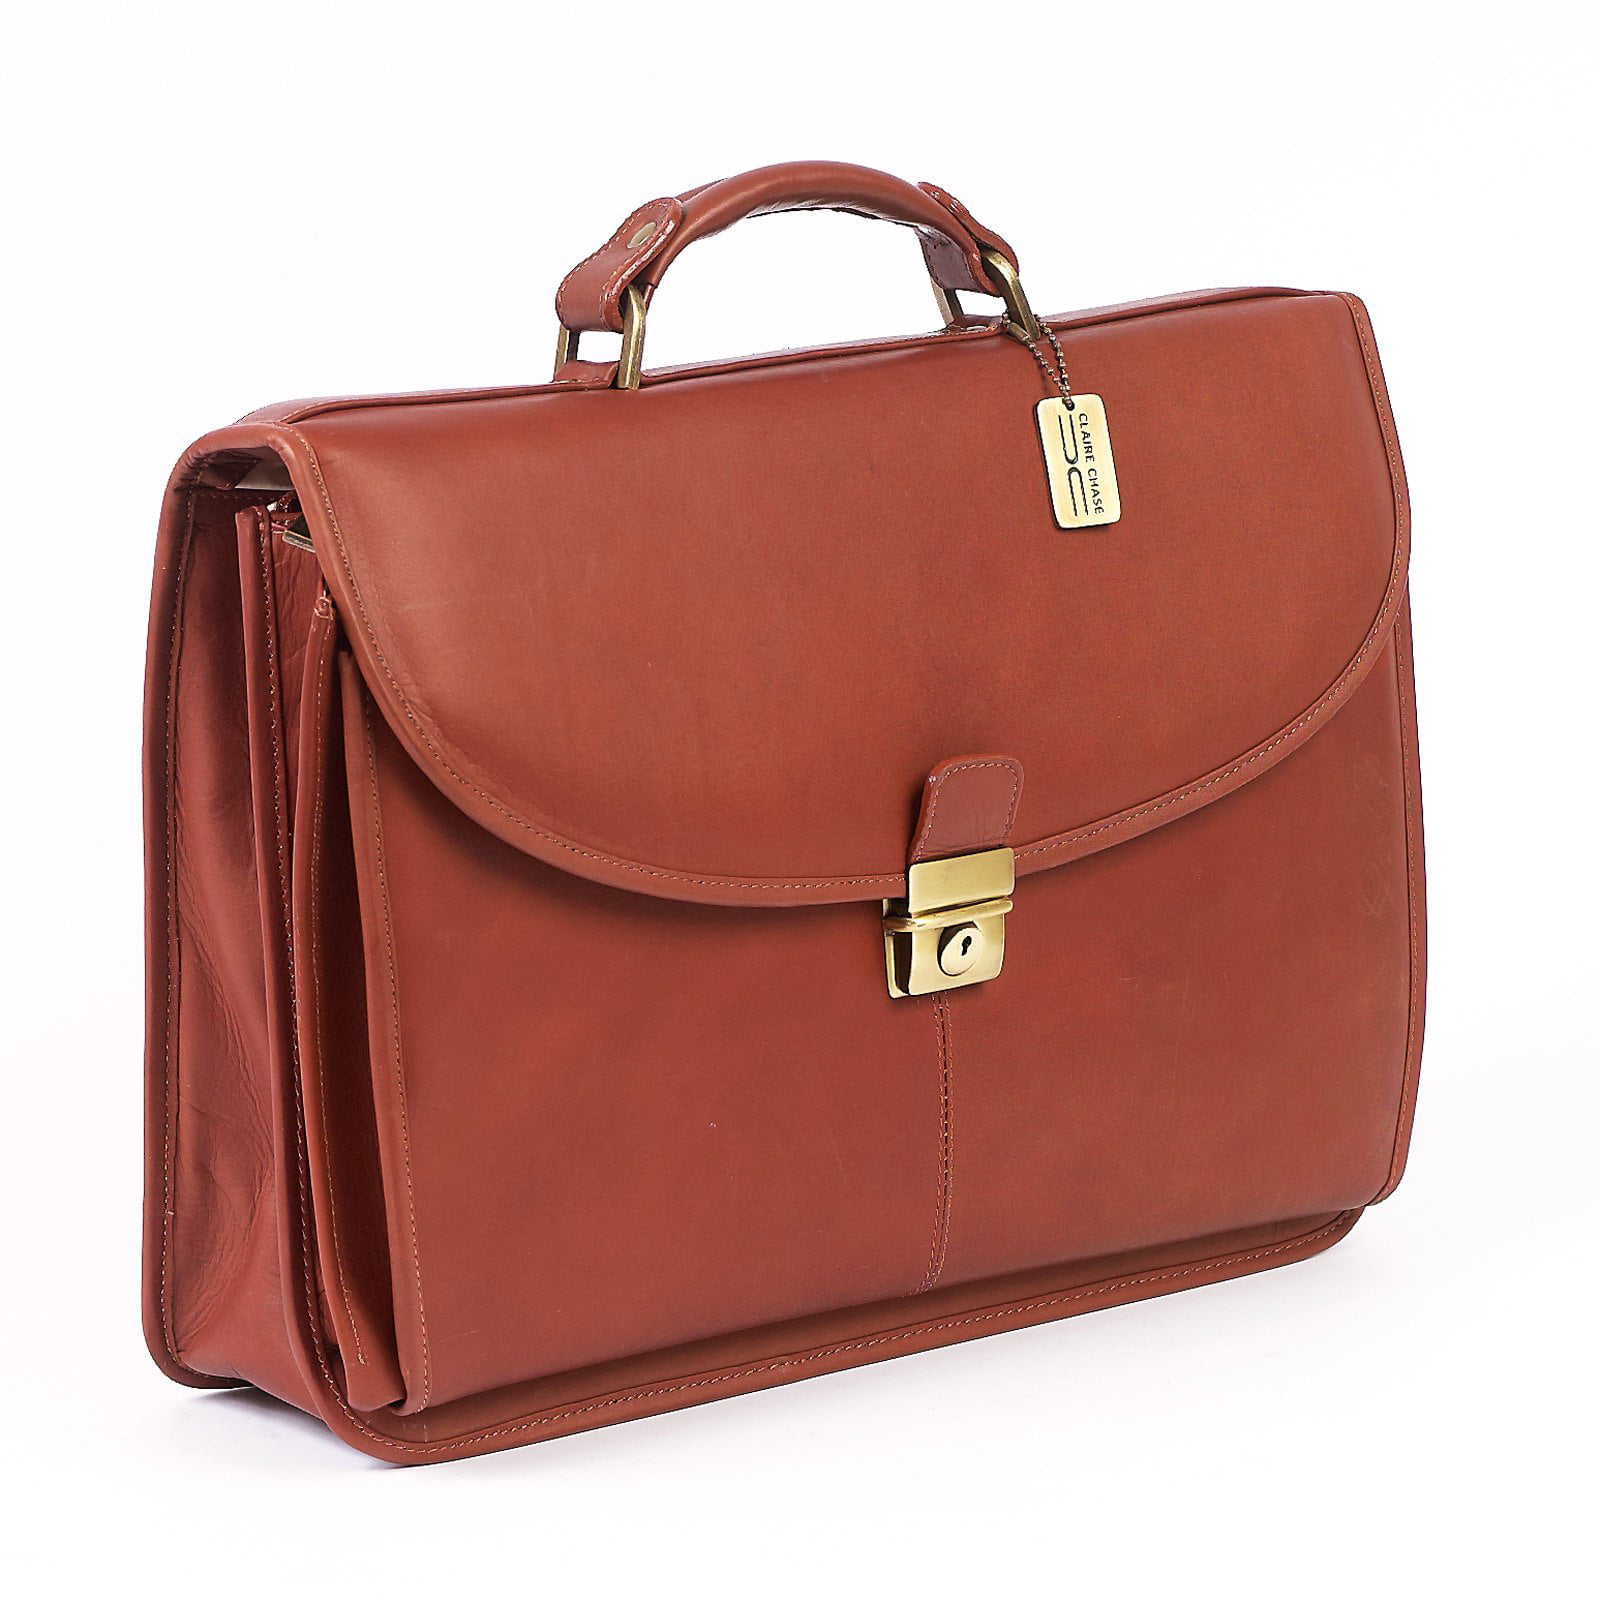 ClaireChase Lawyers Briefcase - Saddle - Walmart.com